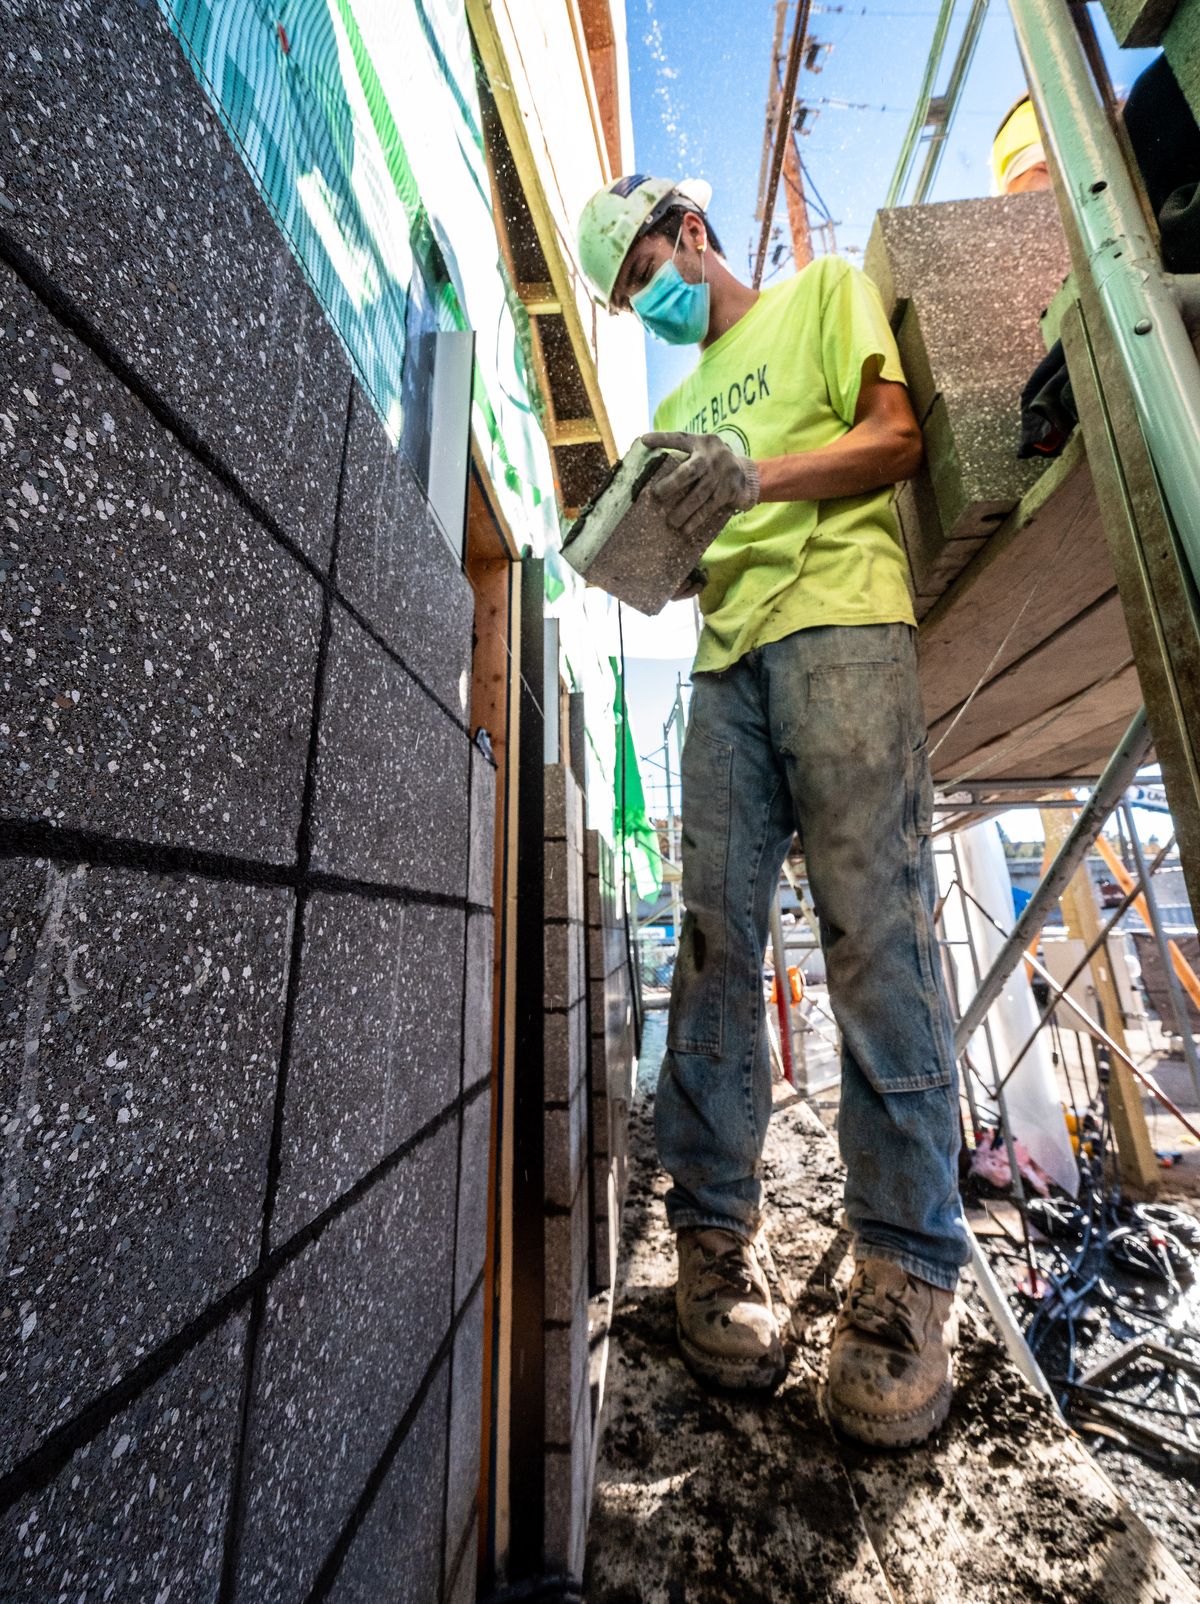 Logan Dyson with Spilker Masonry Co., works on an exterior wall of the new Hope House women’s shelter under construction at 1301 W. Third Ave.  (Colin Mulvany/THE SPOKESMAN-REVIEW)